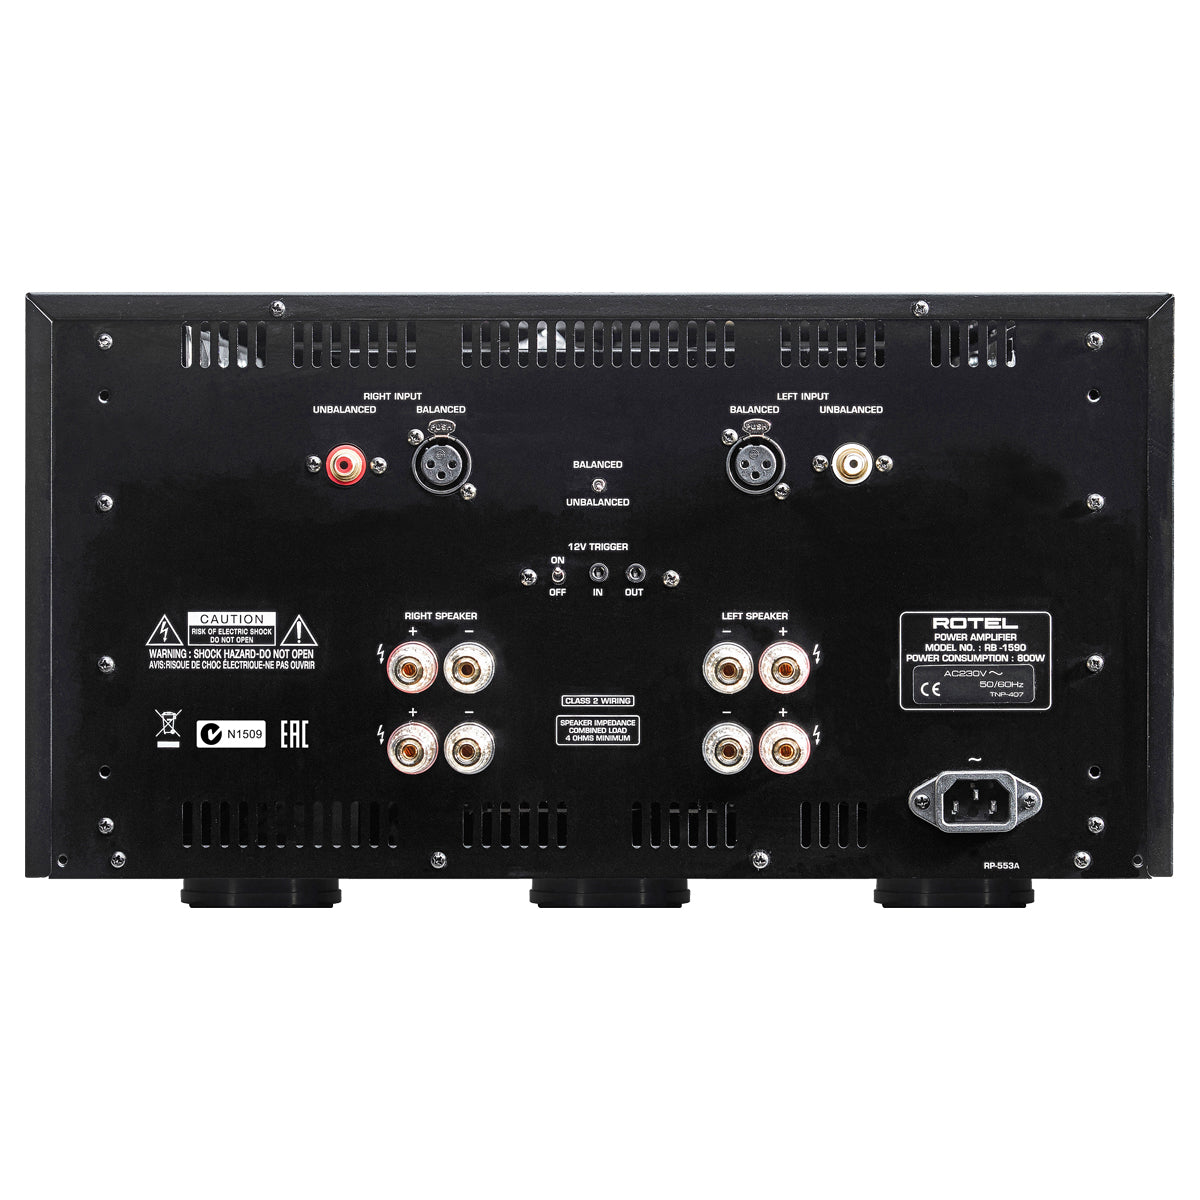 Rotel RB1590 stereo Power Amplifier - Black - The Audio Experts